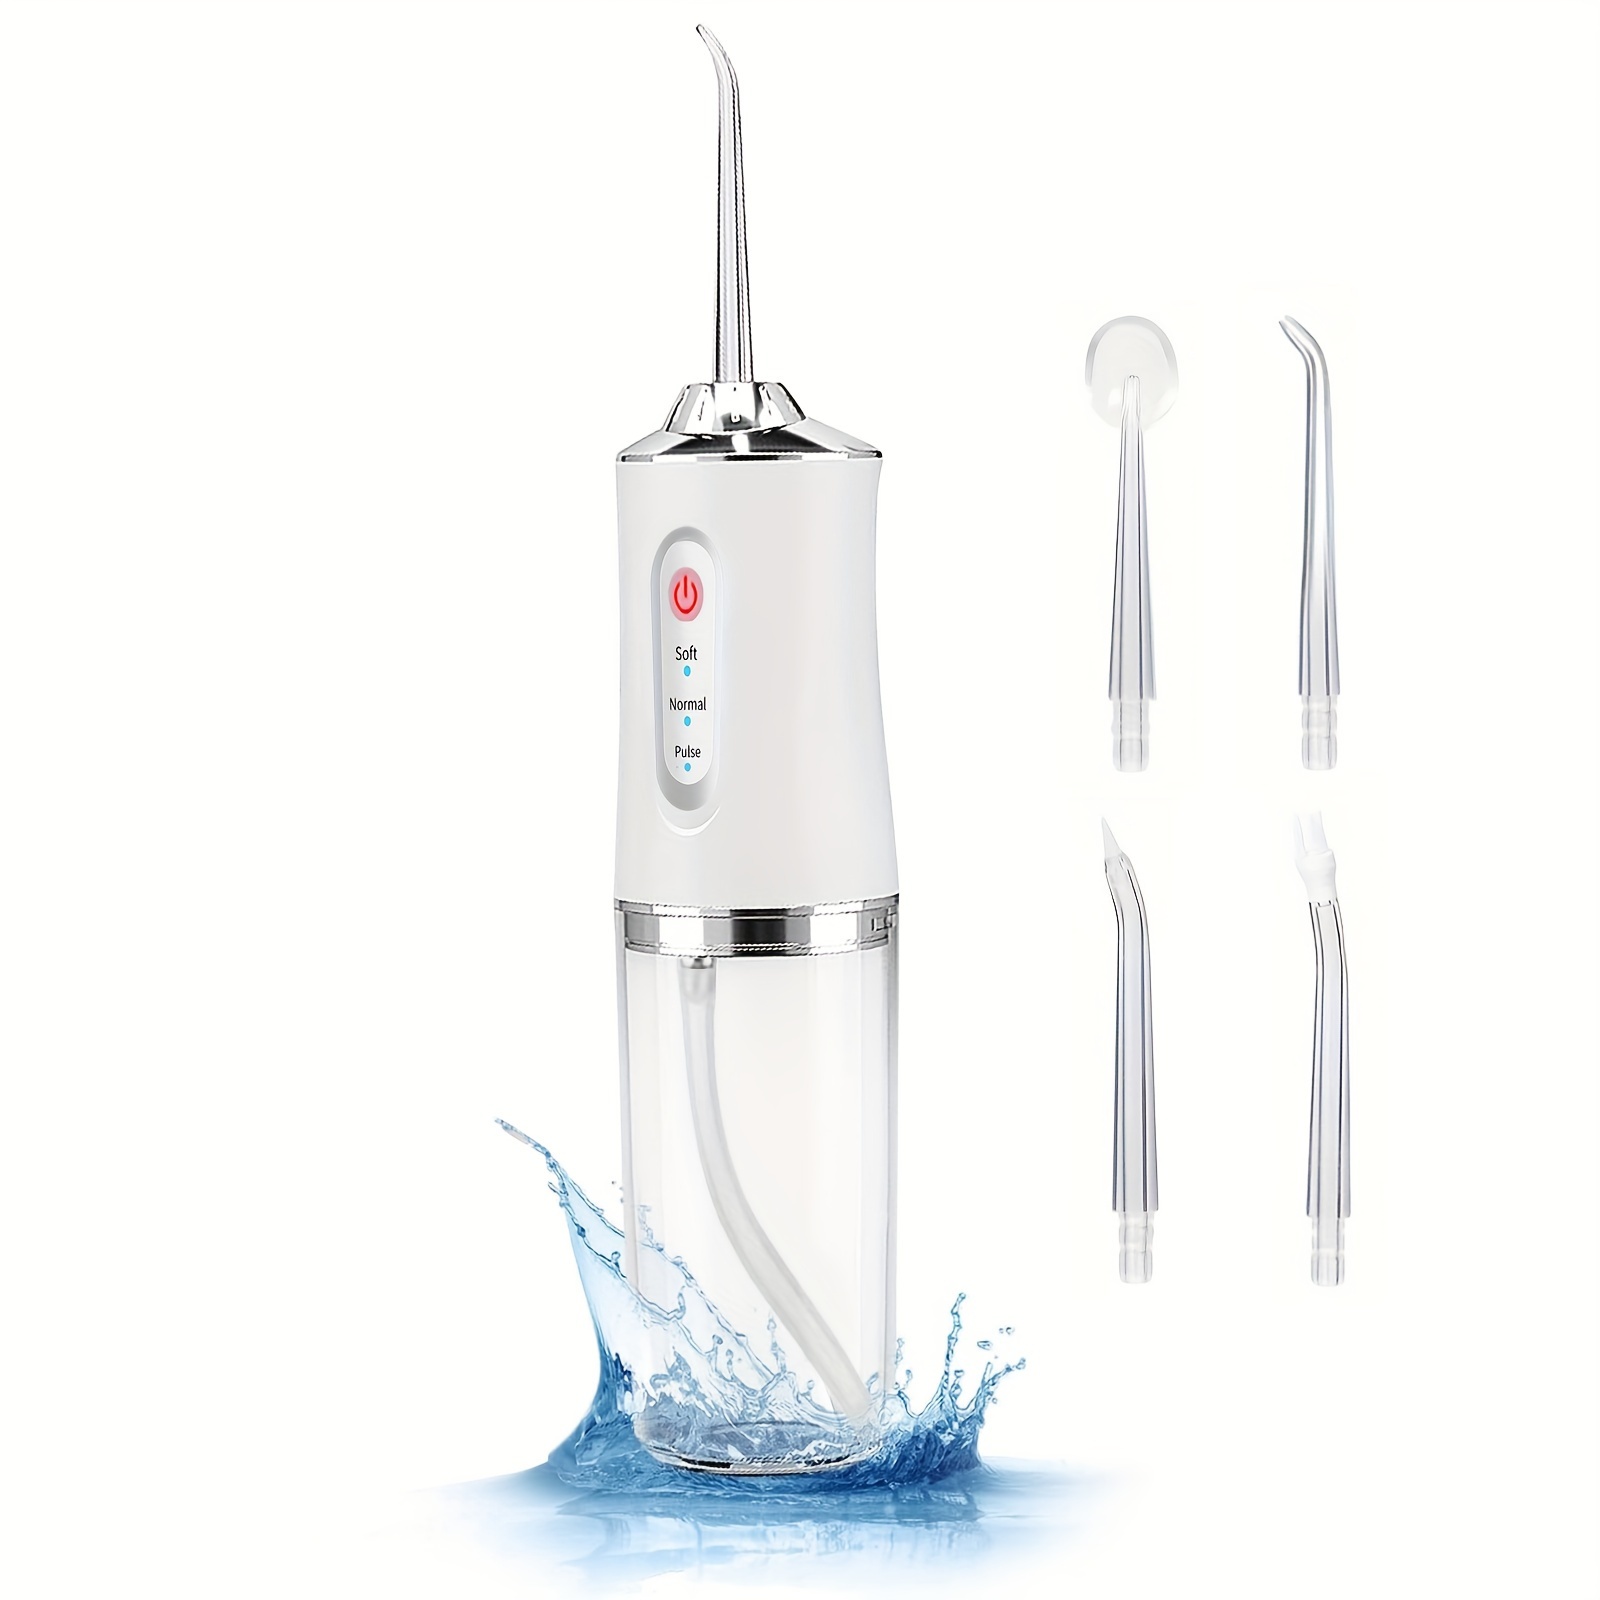 

1 Set Electric Water Flossers For Teeth, Dental Oral Irrigator With 4 Jet Tips, 3 Cleaning Modes, 300ml Detachable Reservoir, Rechargeable Cordless Waterproof Teeth Brush Kit At Home And Travel